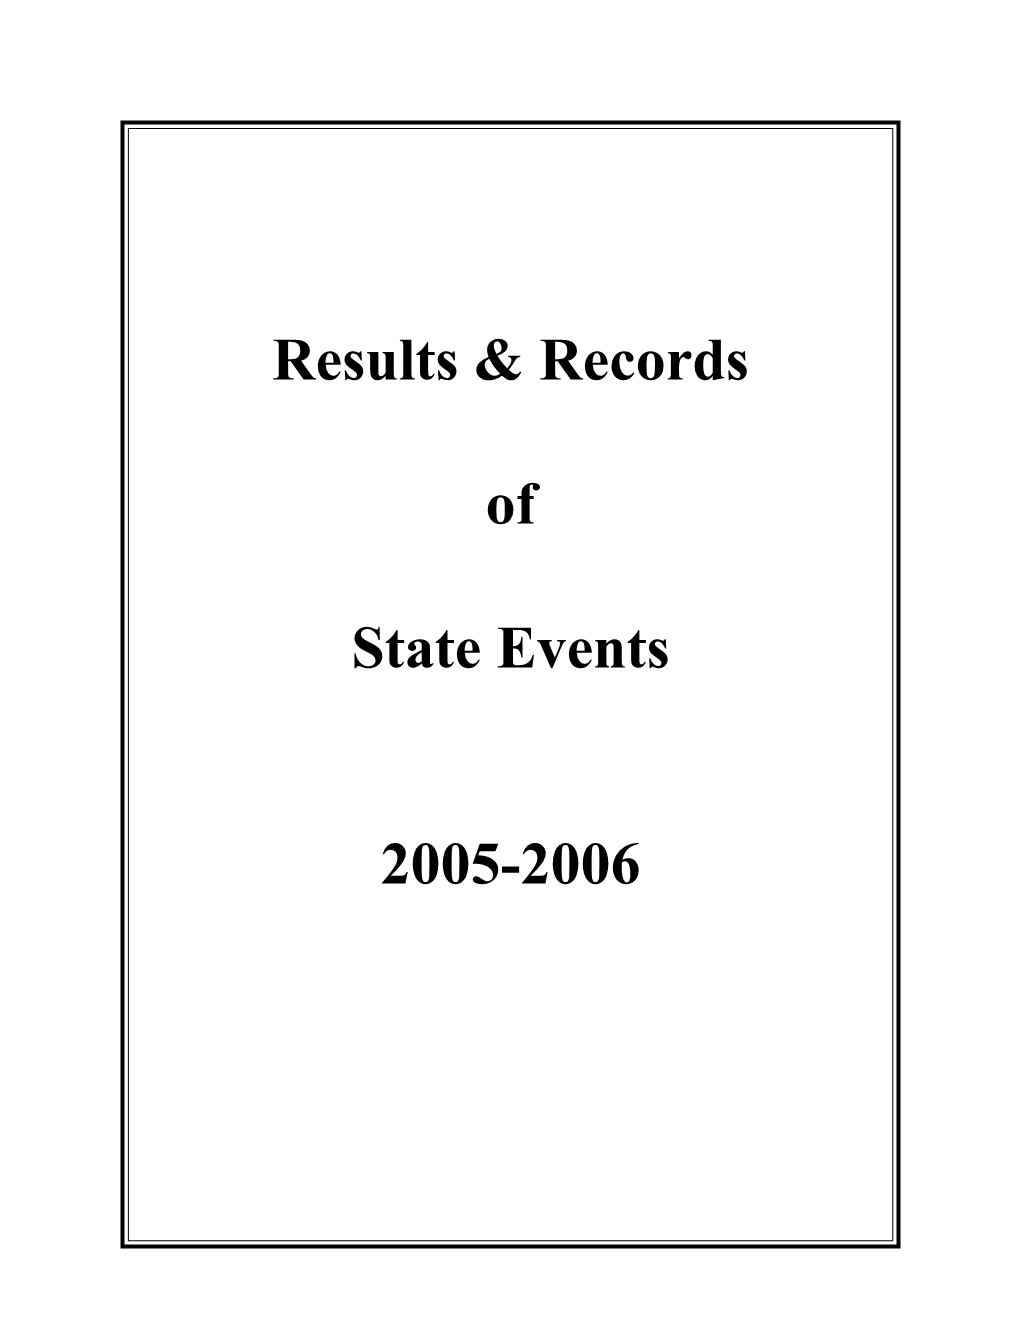 Results & Records of State Events 2005-2006